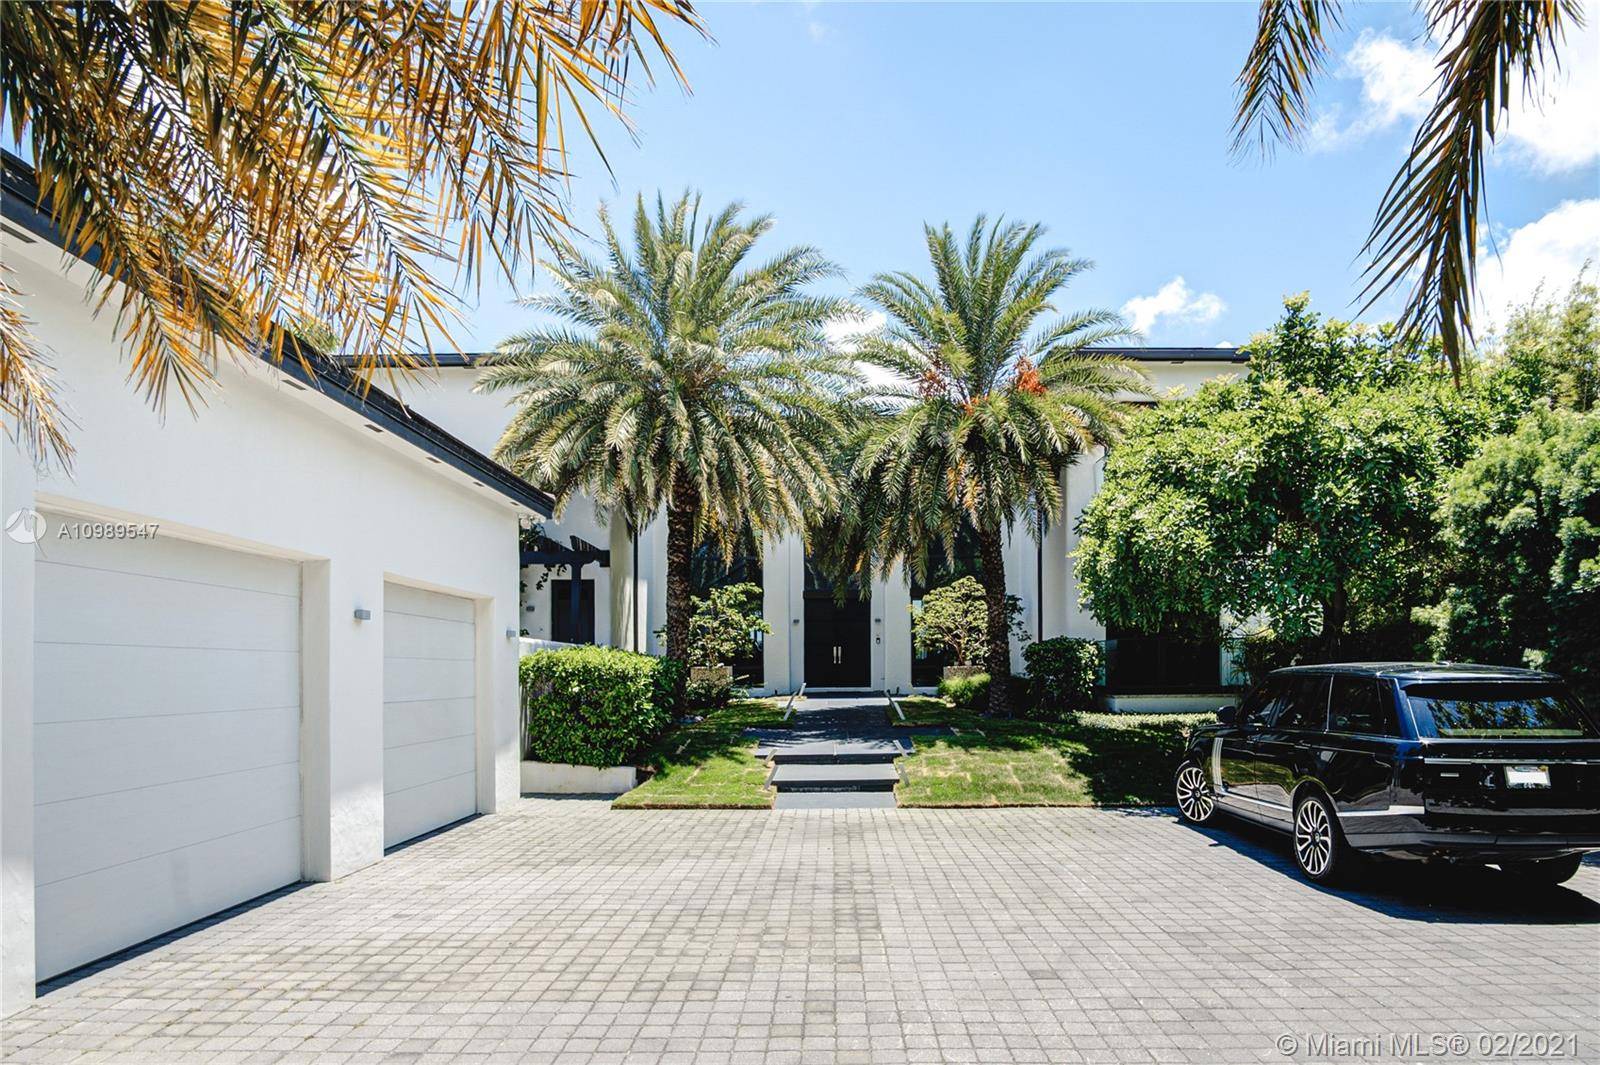 Stunning Modern Home located on the prestigious Hibiscus Island with a 24 7 guard gate and patrol.